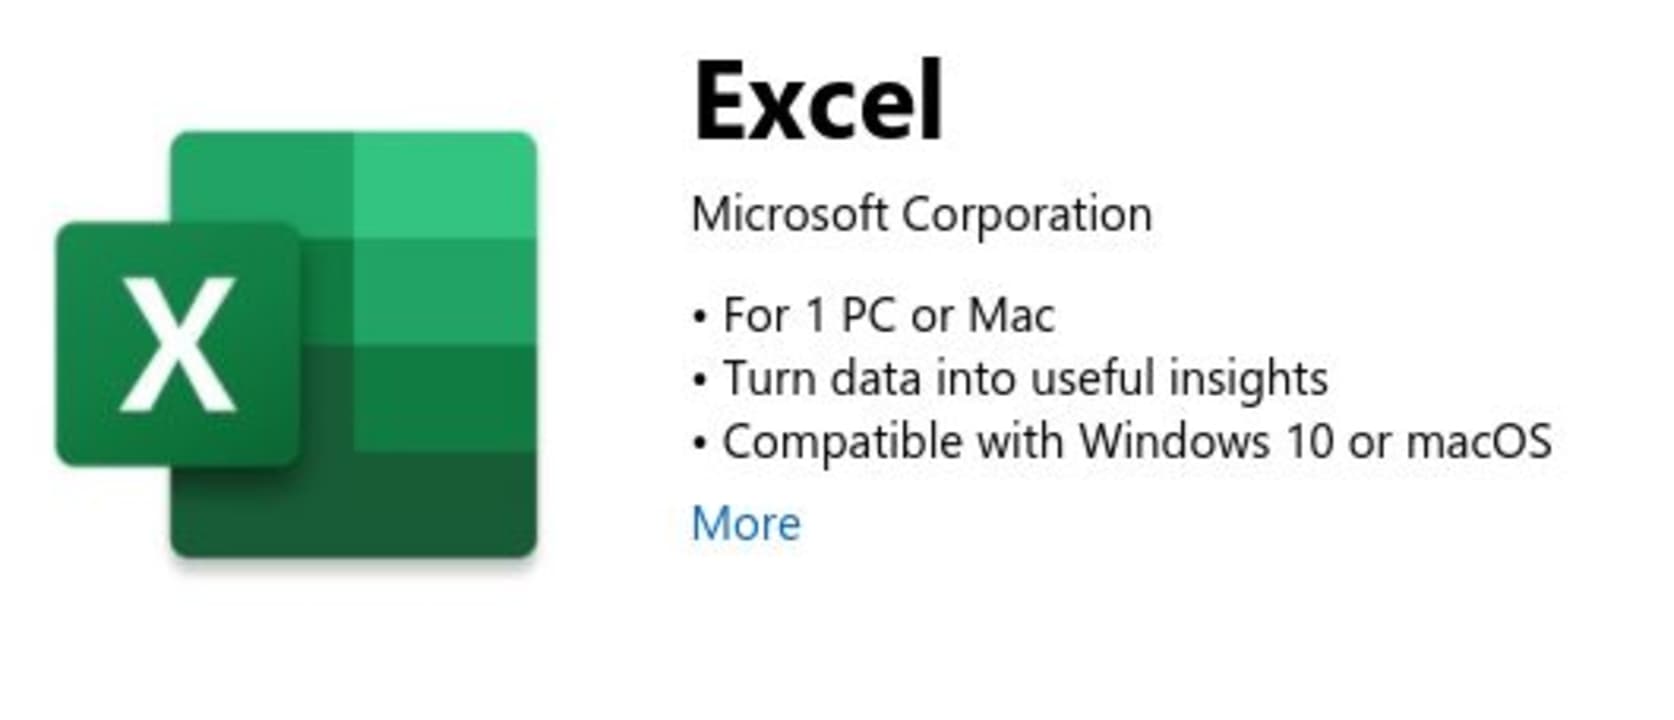 How to Download Microsoft Excel